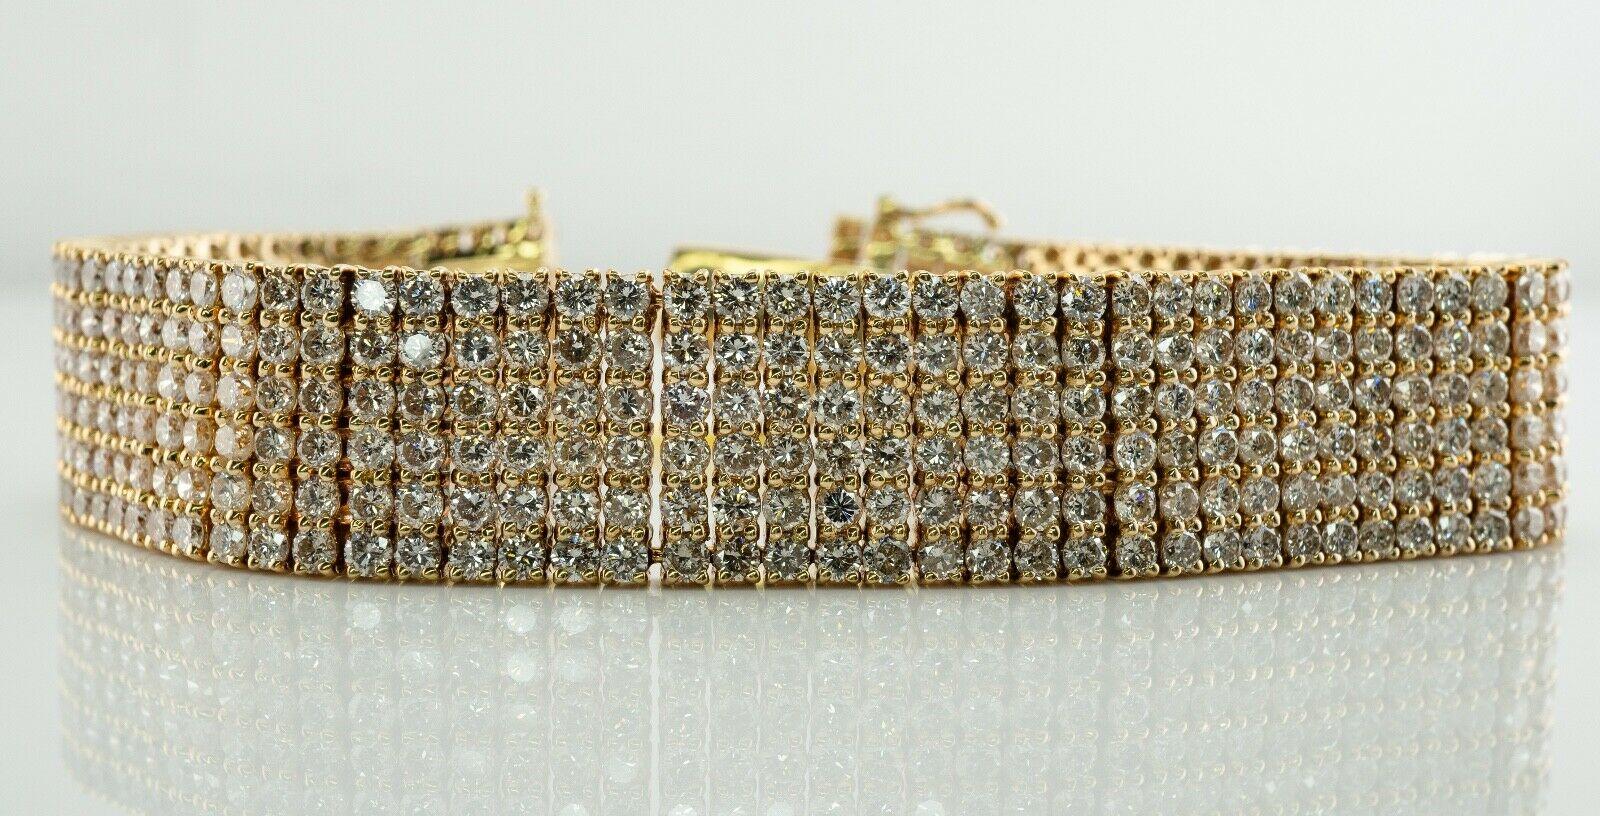 This gorgeous estate bracelet still has a tag from the auction attached.
It is finely crafted in solid 18K Yellow Gold and set with 456 round brilliant cut diamonds in six rows. 
The diamonds range from VS2 to SI1 clarity and H color totaling 22.13